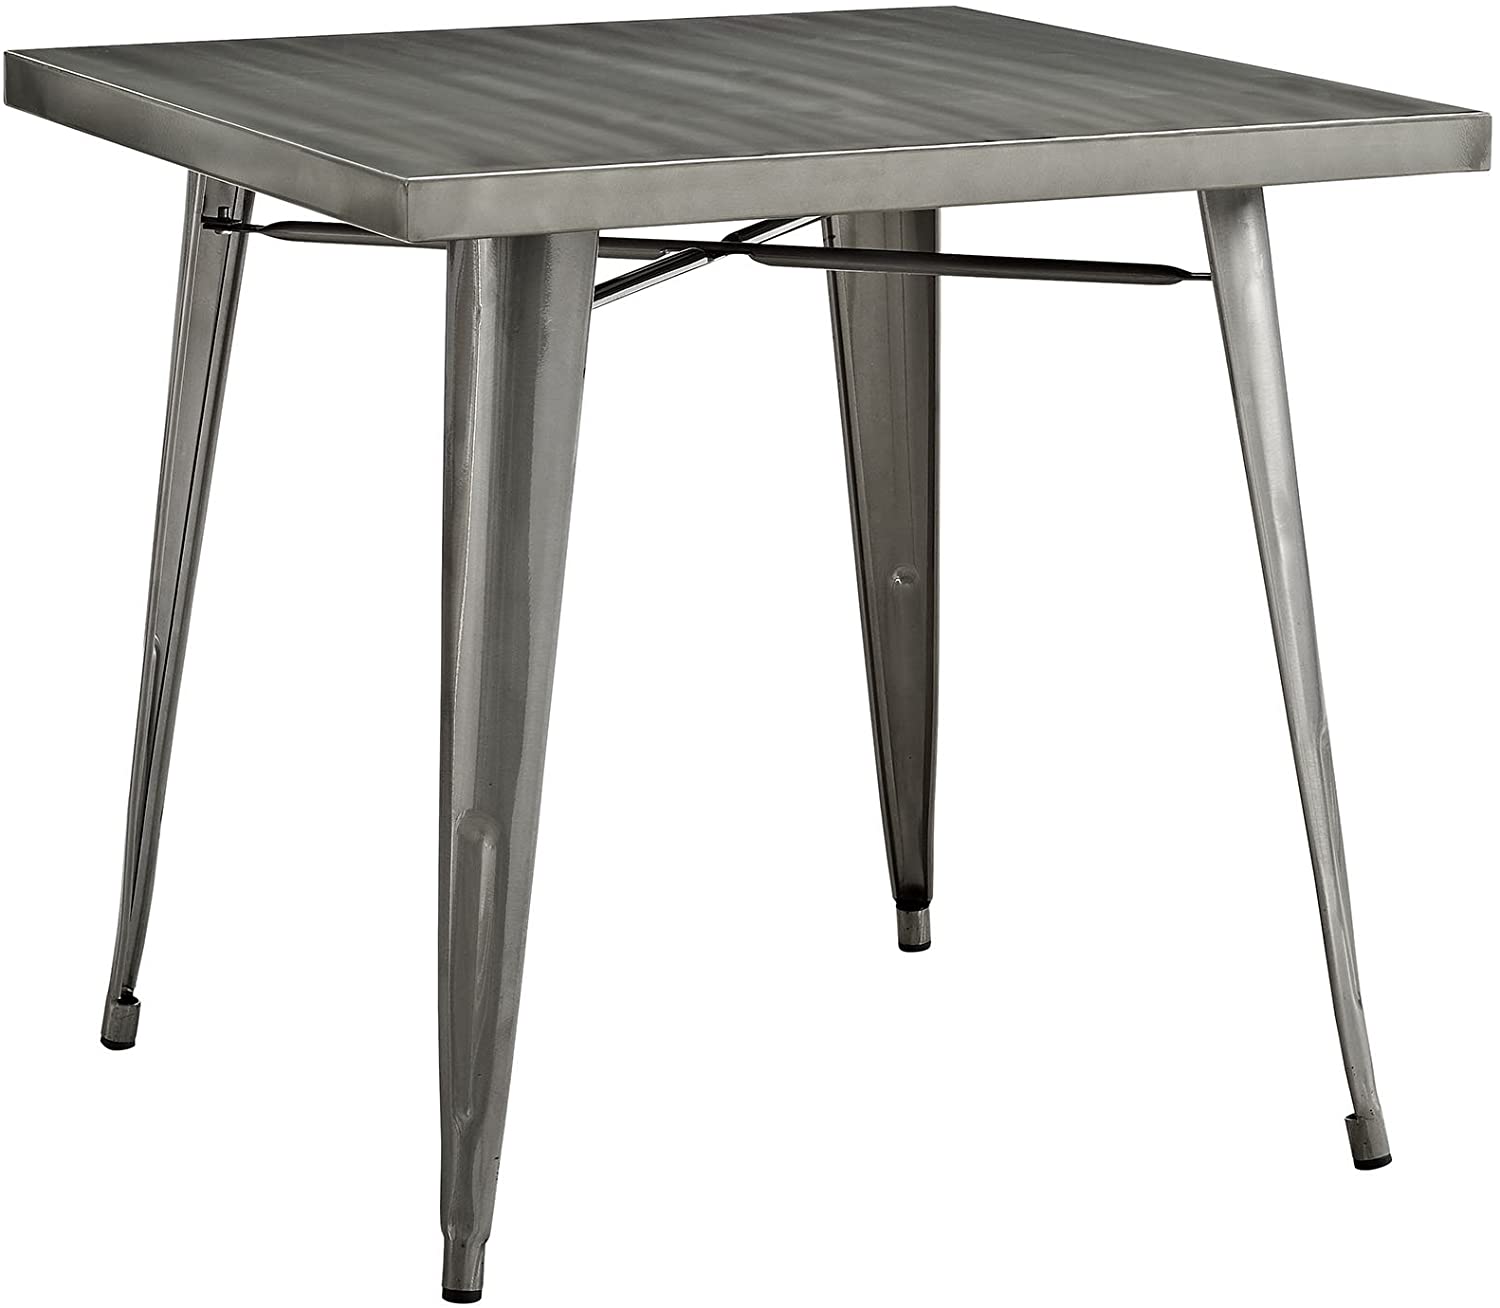 B01CDWF4BW Modway Alacrity 32" Rustic Modern Farmhouse Stainless Steel Metal Square Dining Table in Gunmetal